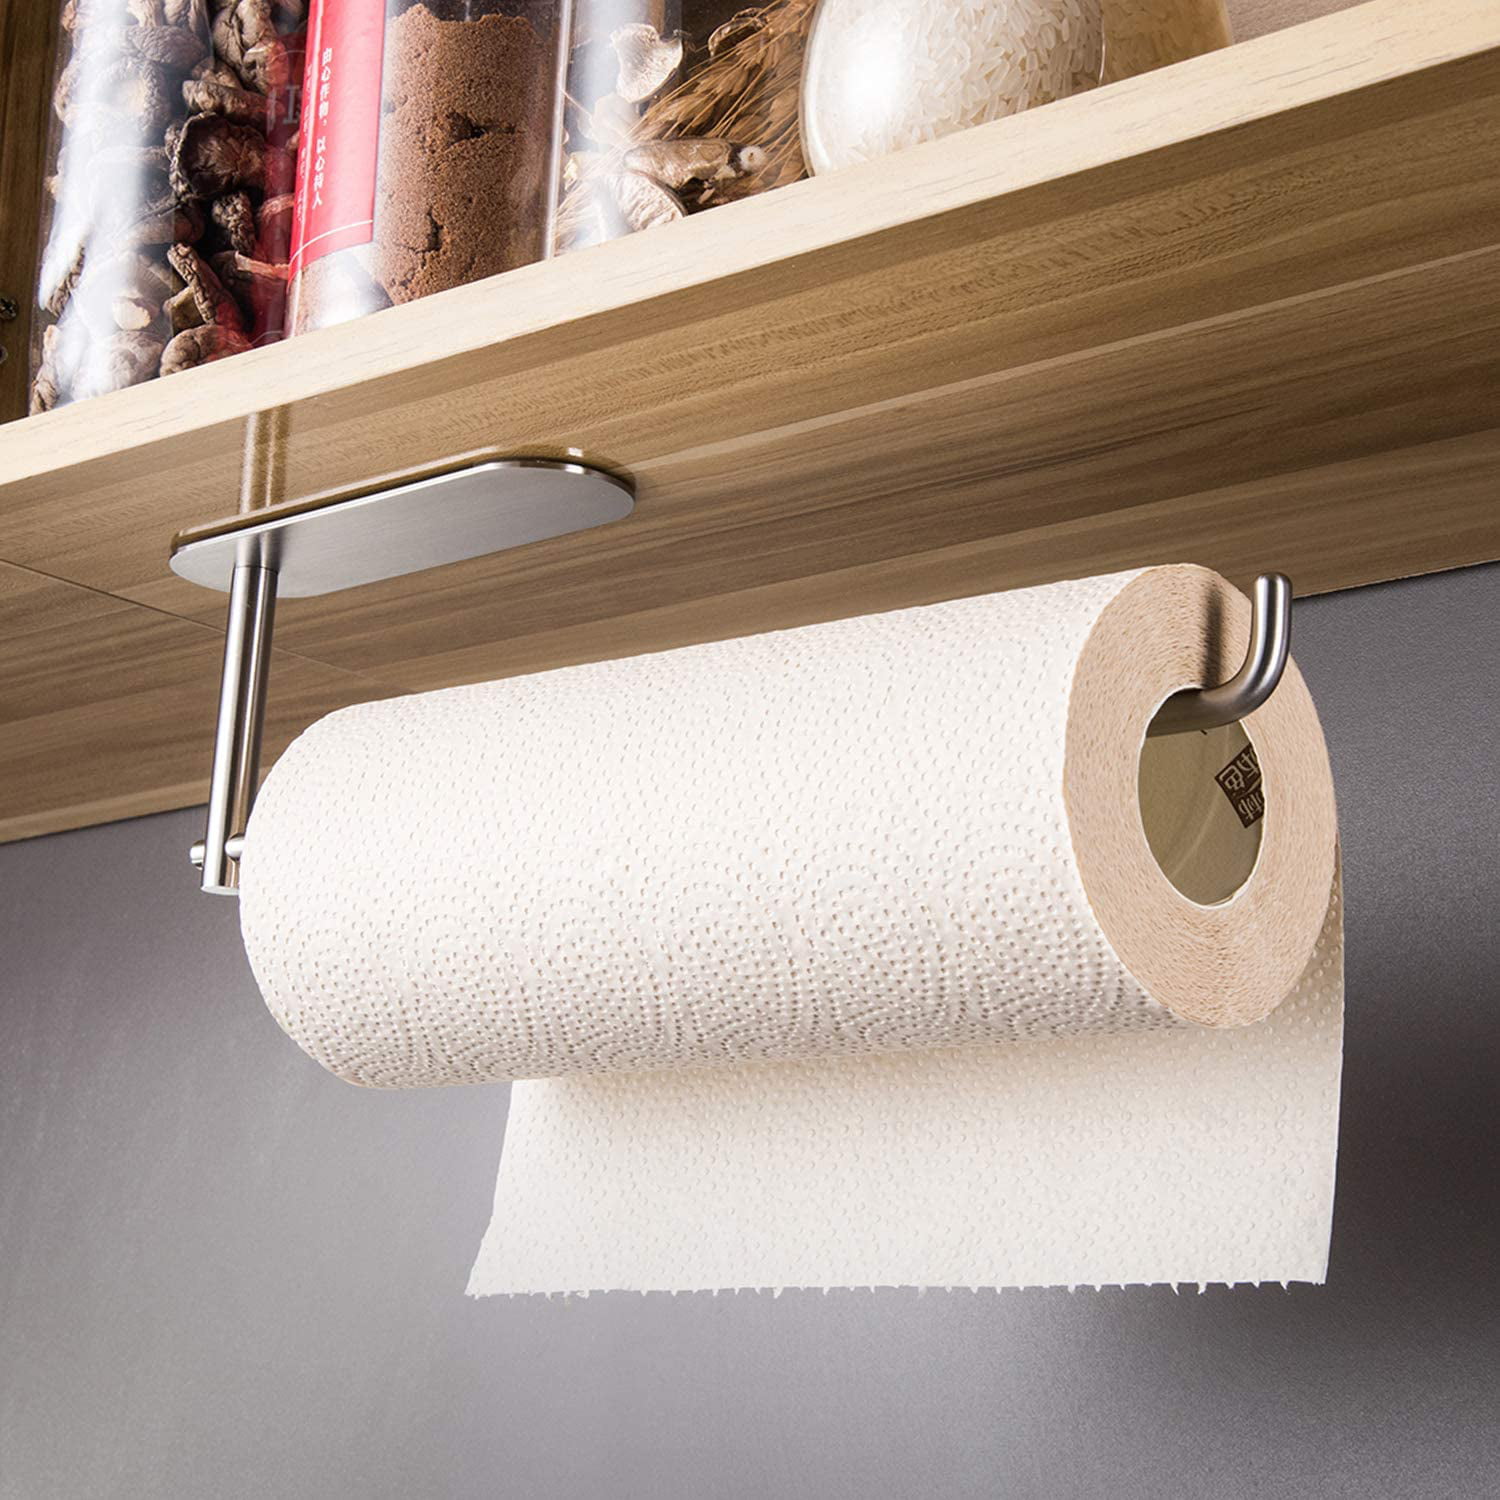 Adhesive Paper Towel Holder SUS304 Stainless Steel Kitchen Tissue Towel Holder Wall Mounted Paper Towel Holder Under Kitchen Cabinet for Shower Bathroom 